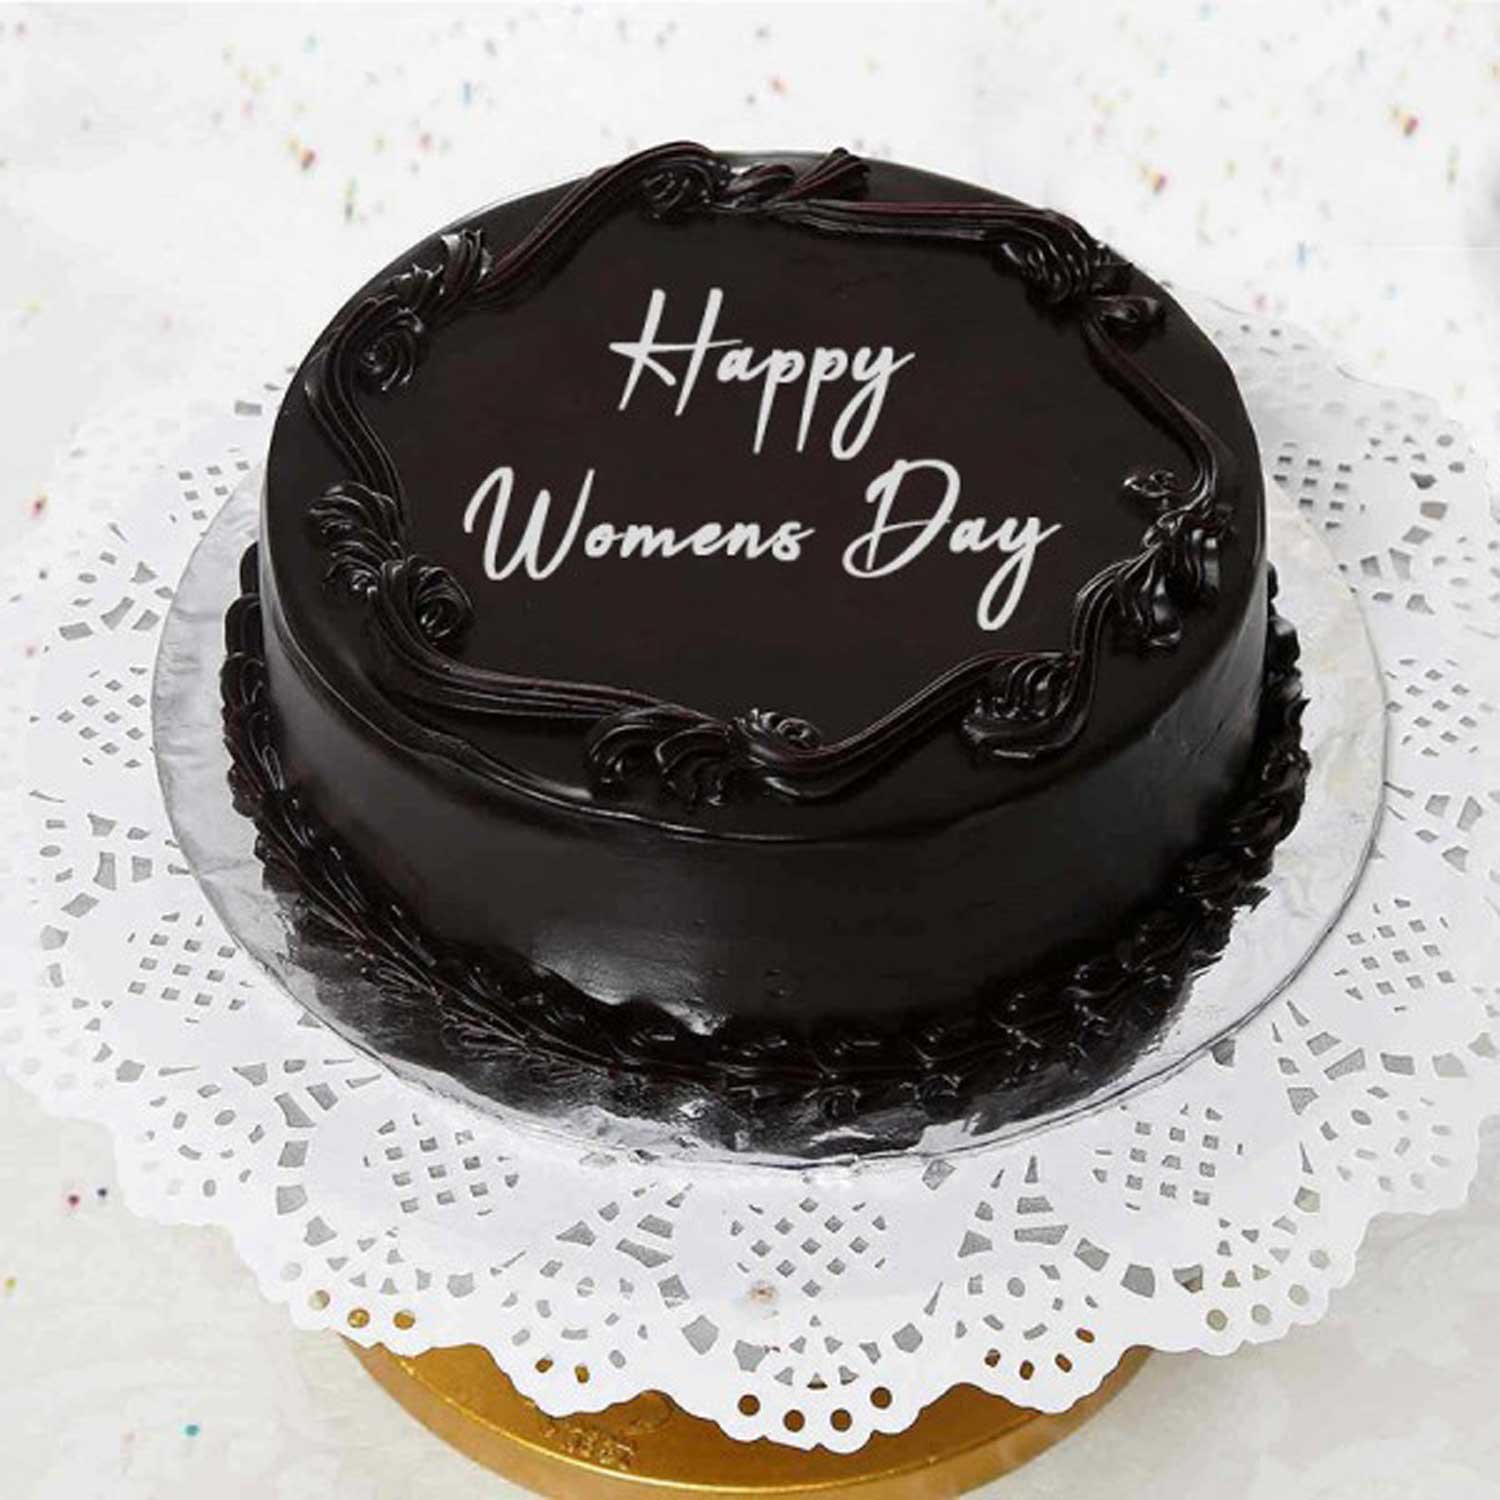 VN Women's Day Cake 11 - Send flowers and cakes to Vietnam